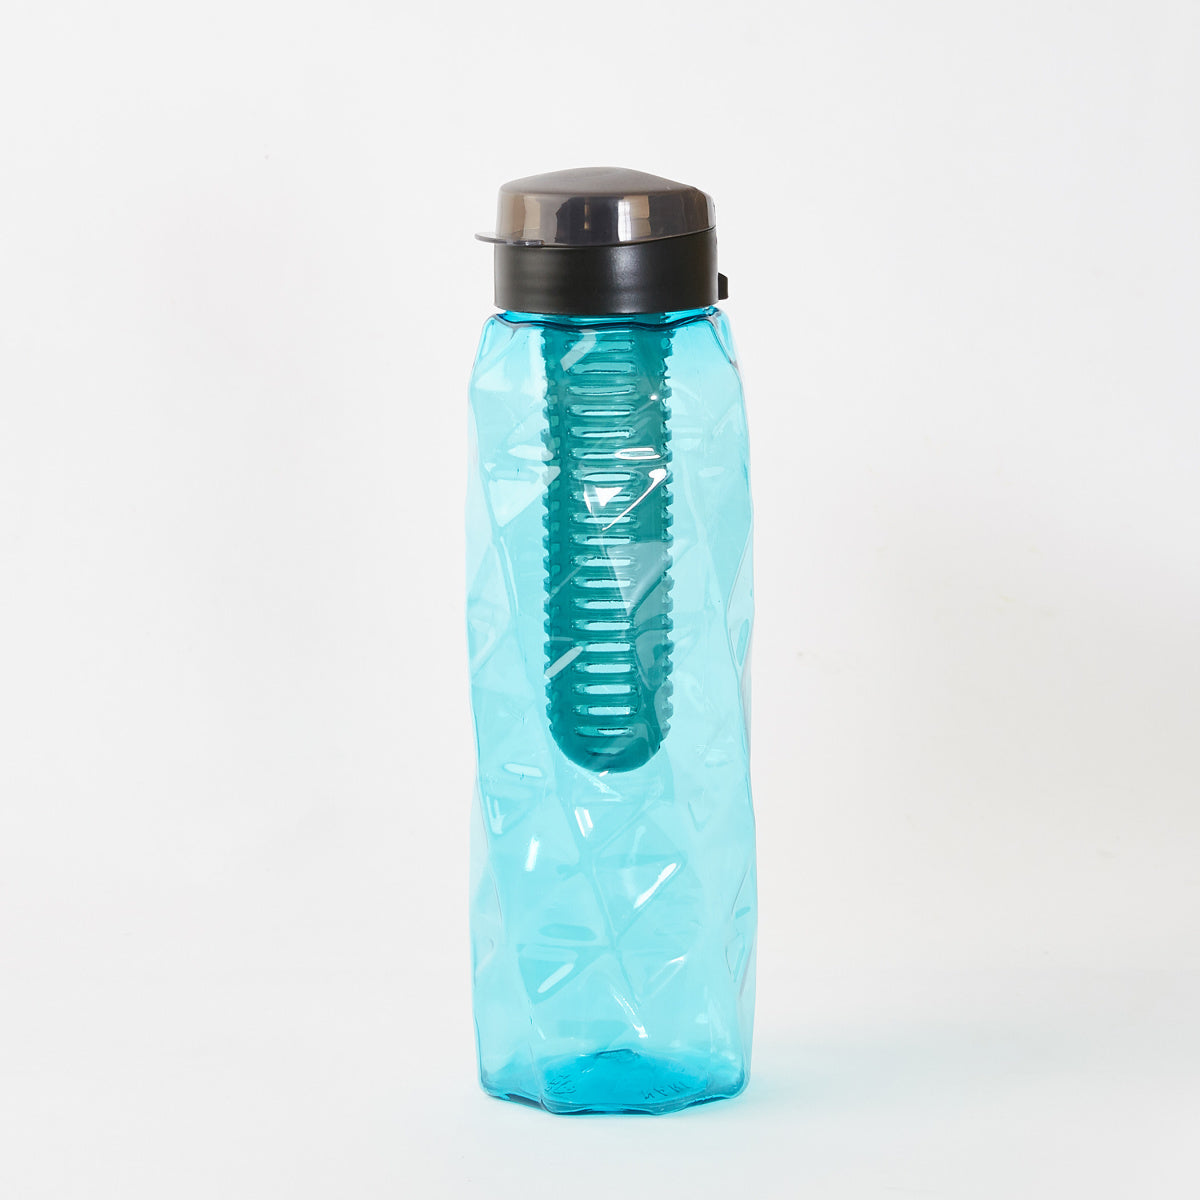 HYDRA Water Bottle with Infuser - 1000 ml